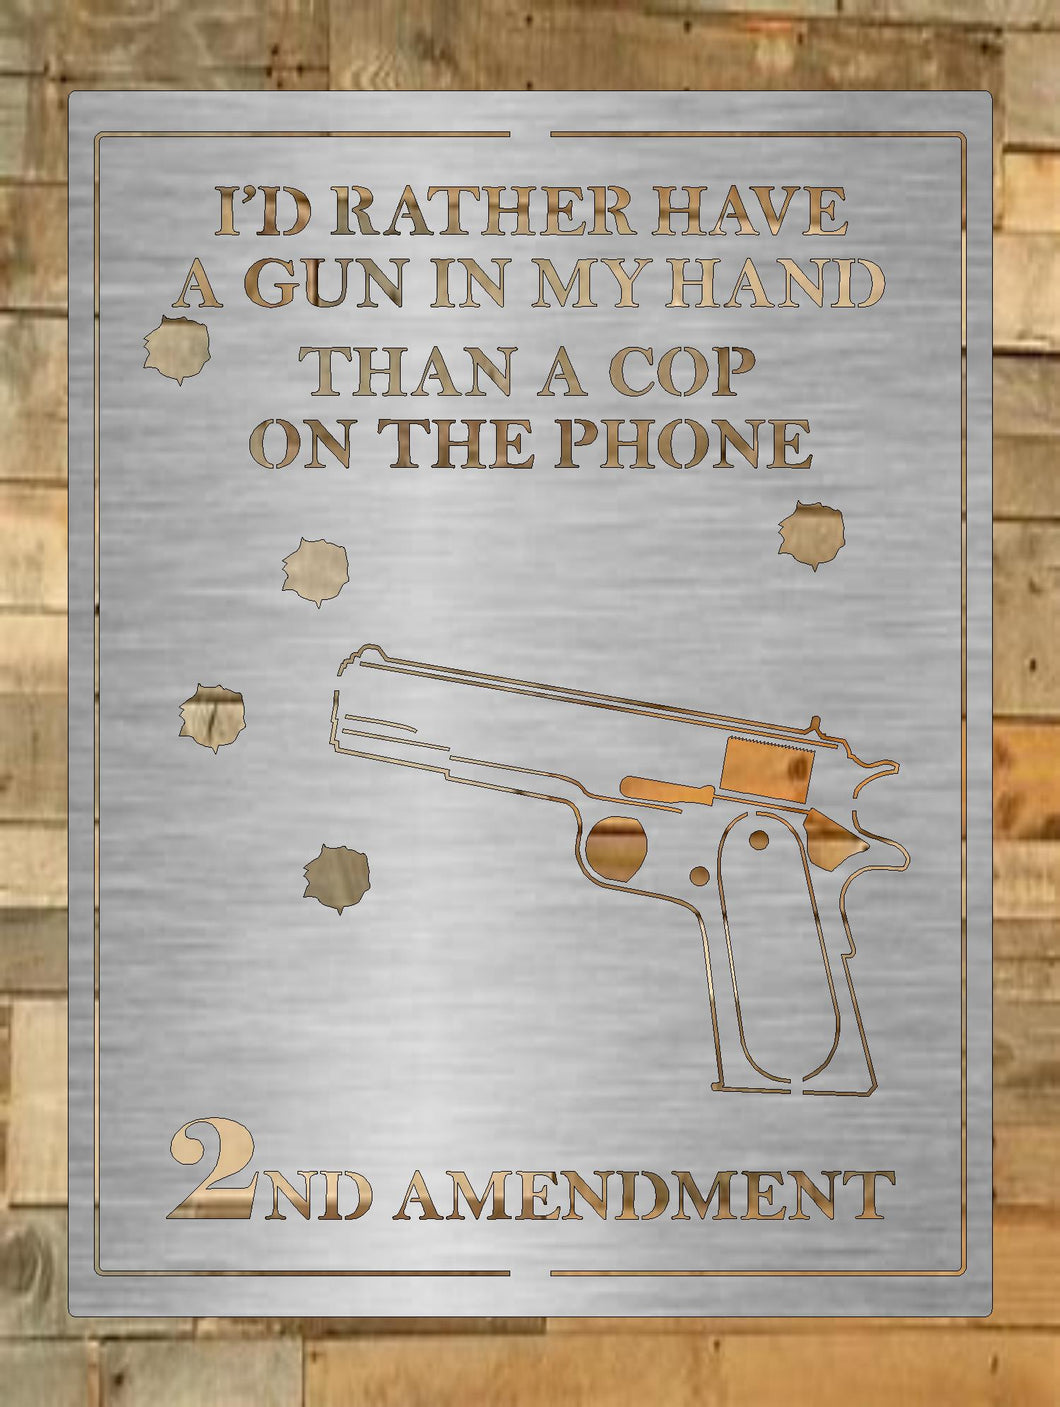 2nd Amendment - I'd Rather Have A Gun In My Hand Than A Cop On The Phone